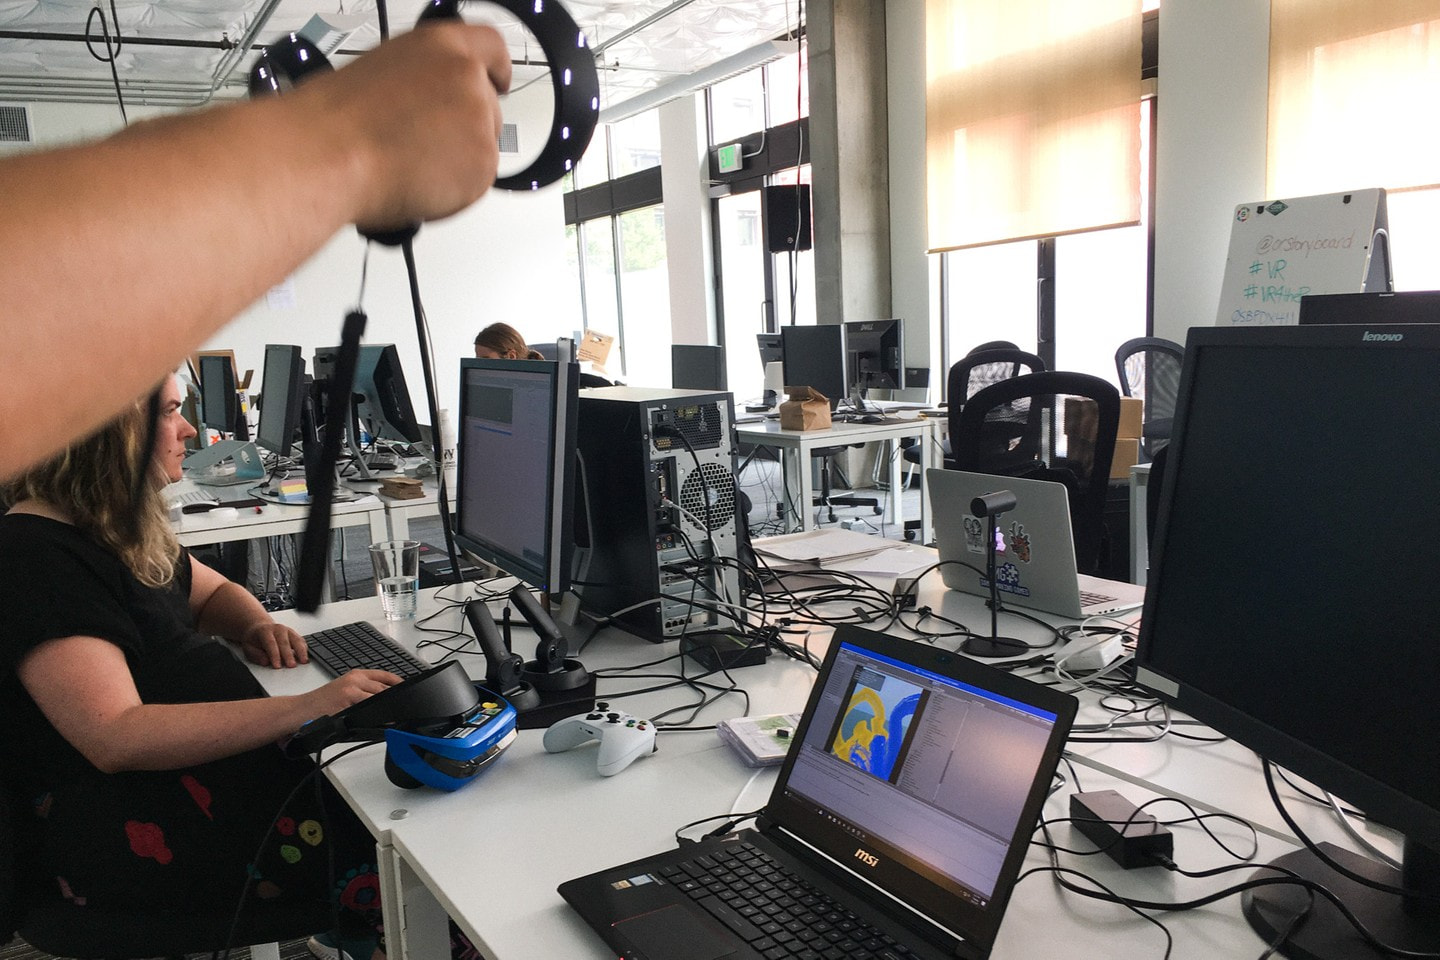 behind the scenes - testing the VR controllers